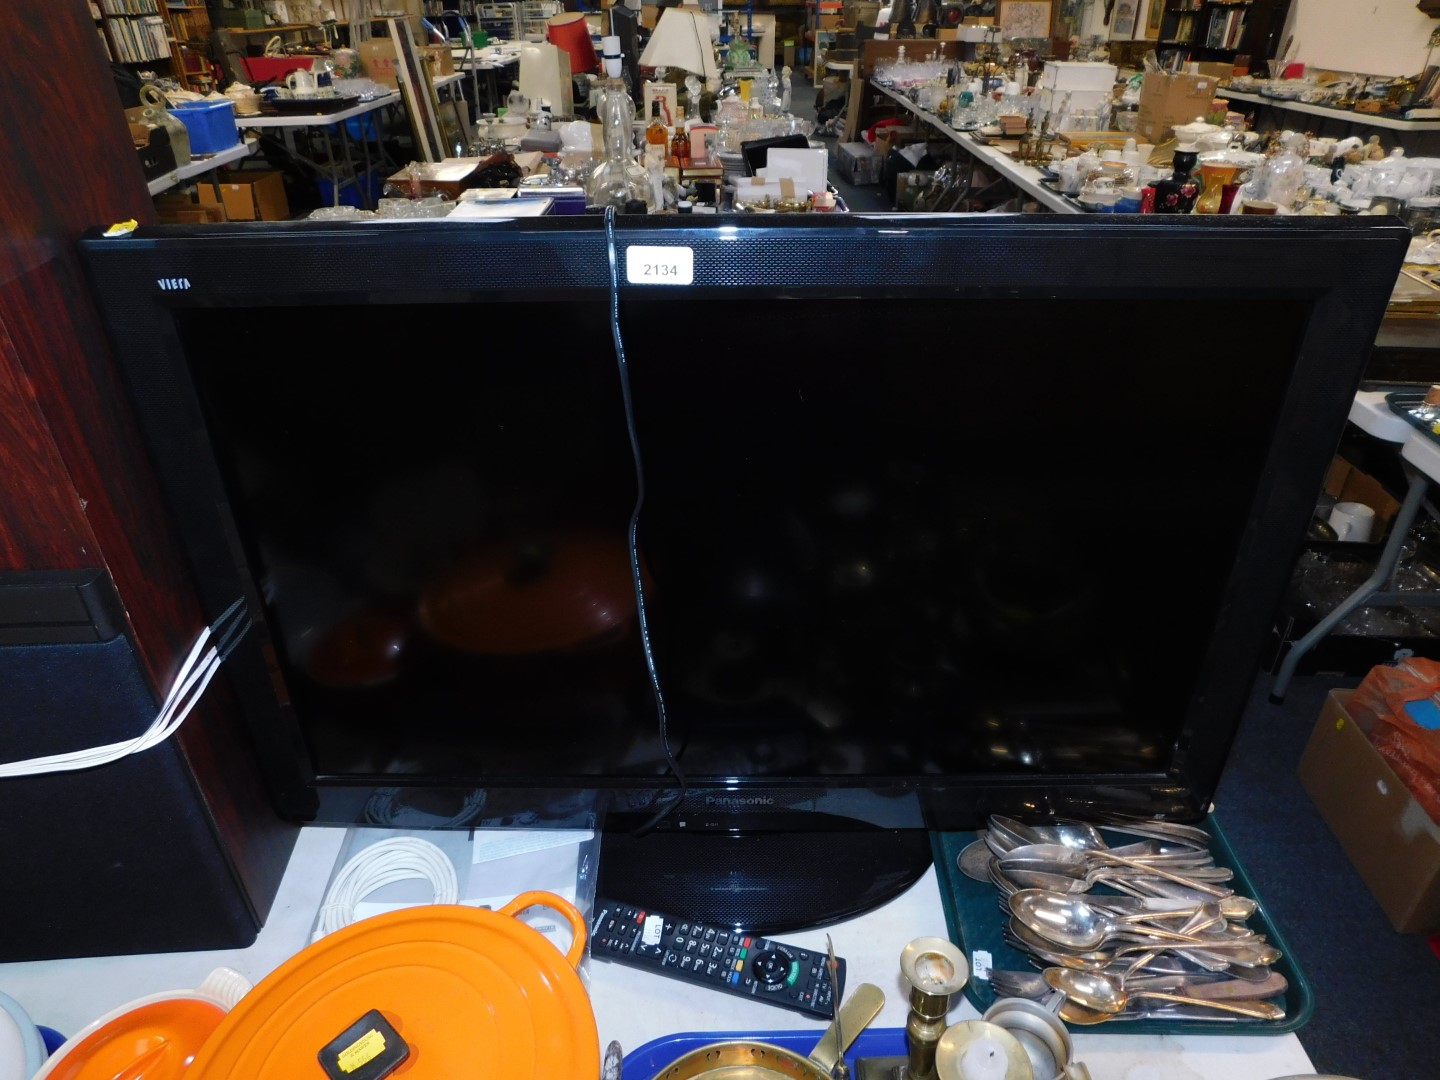 A Panasonic 32" colour television, model TX-L32X20B, with remote.